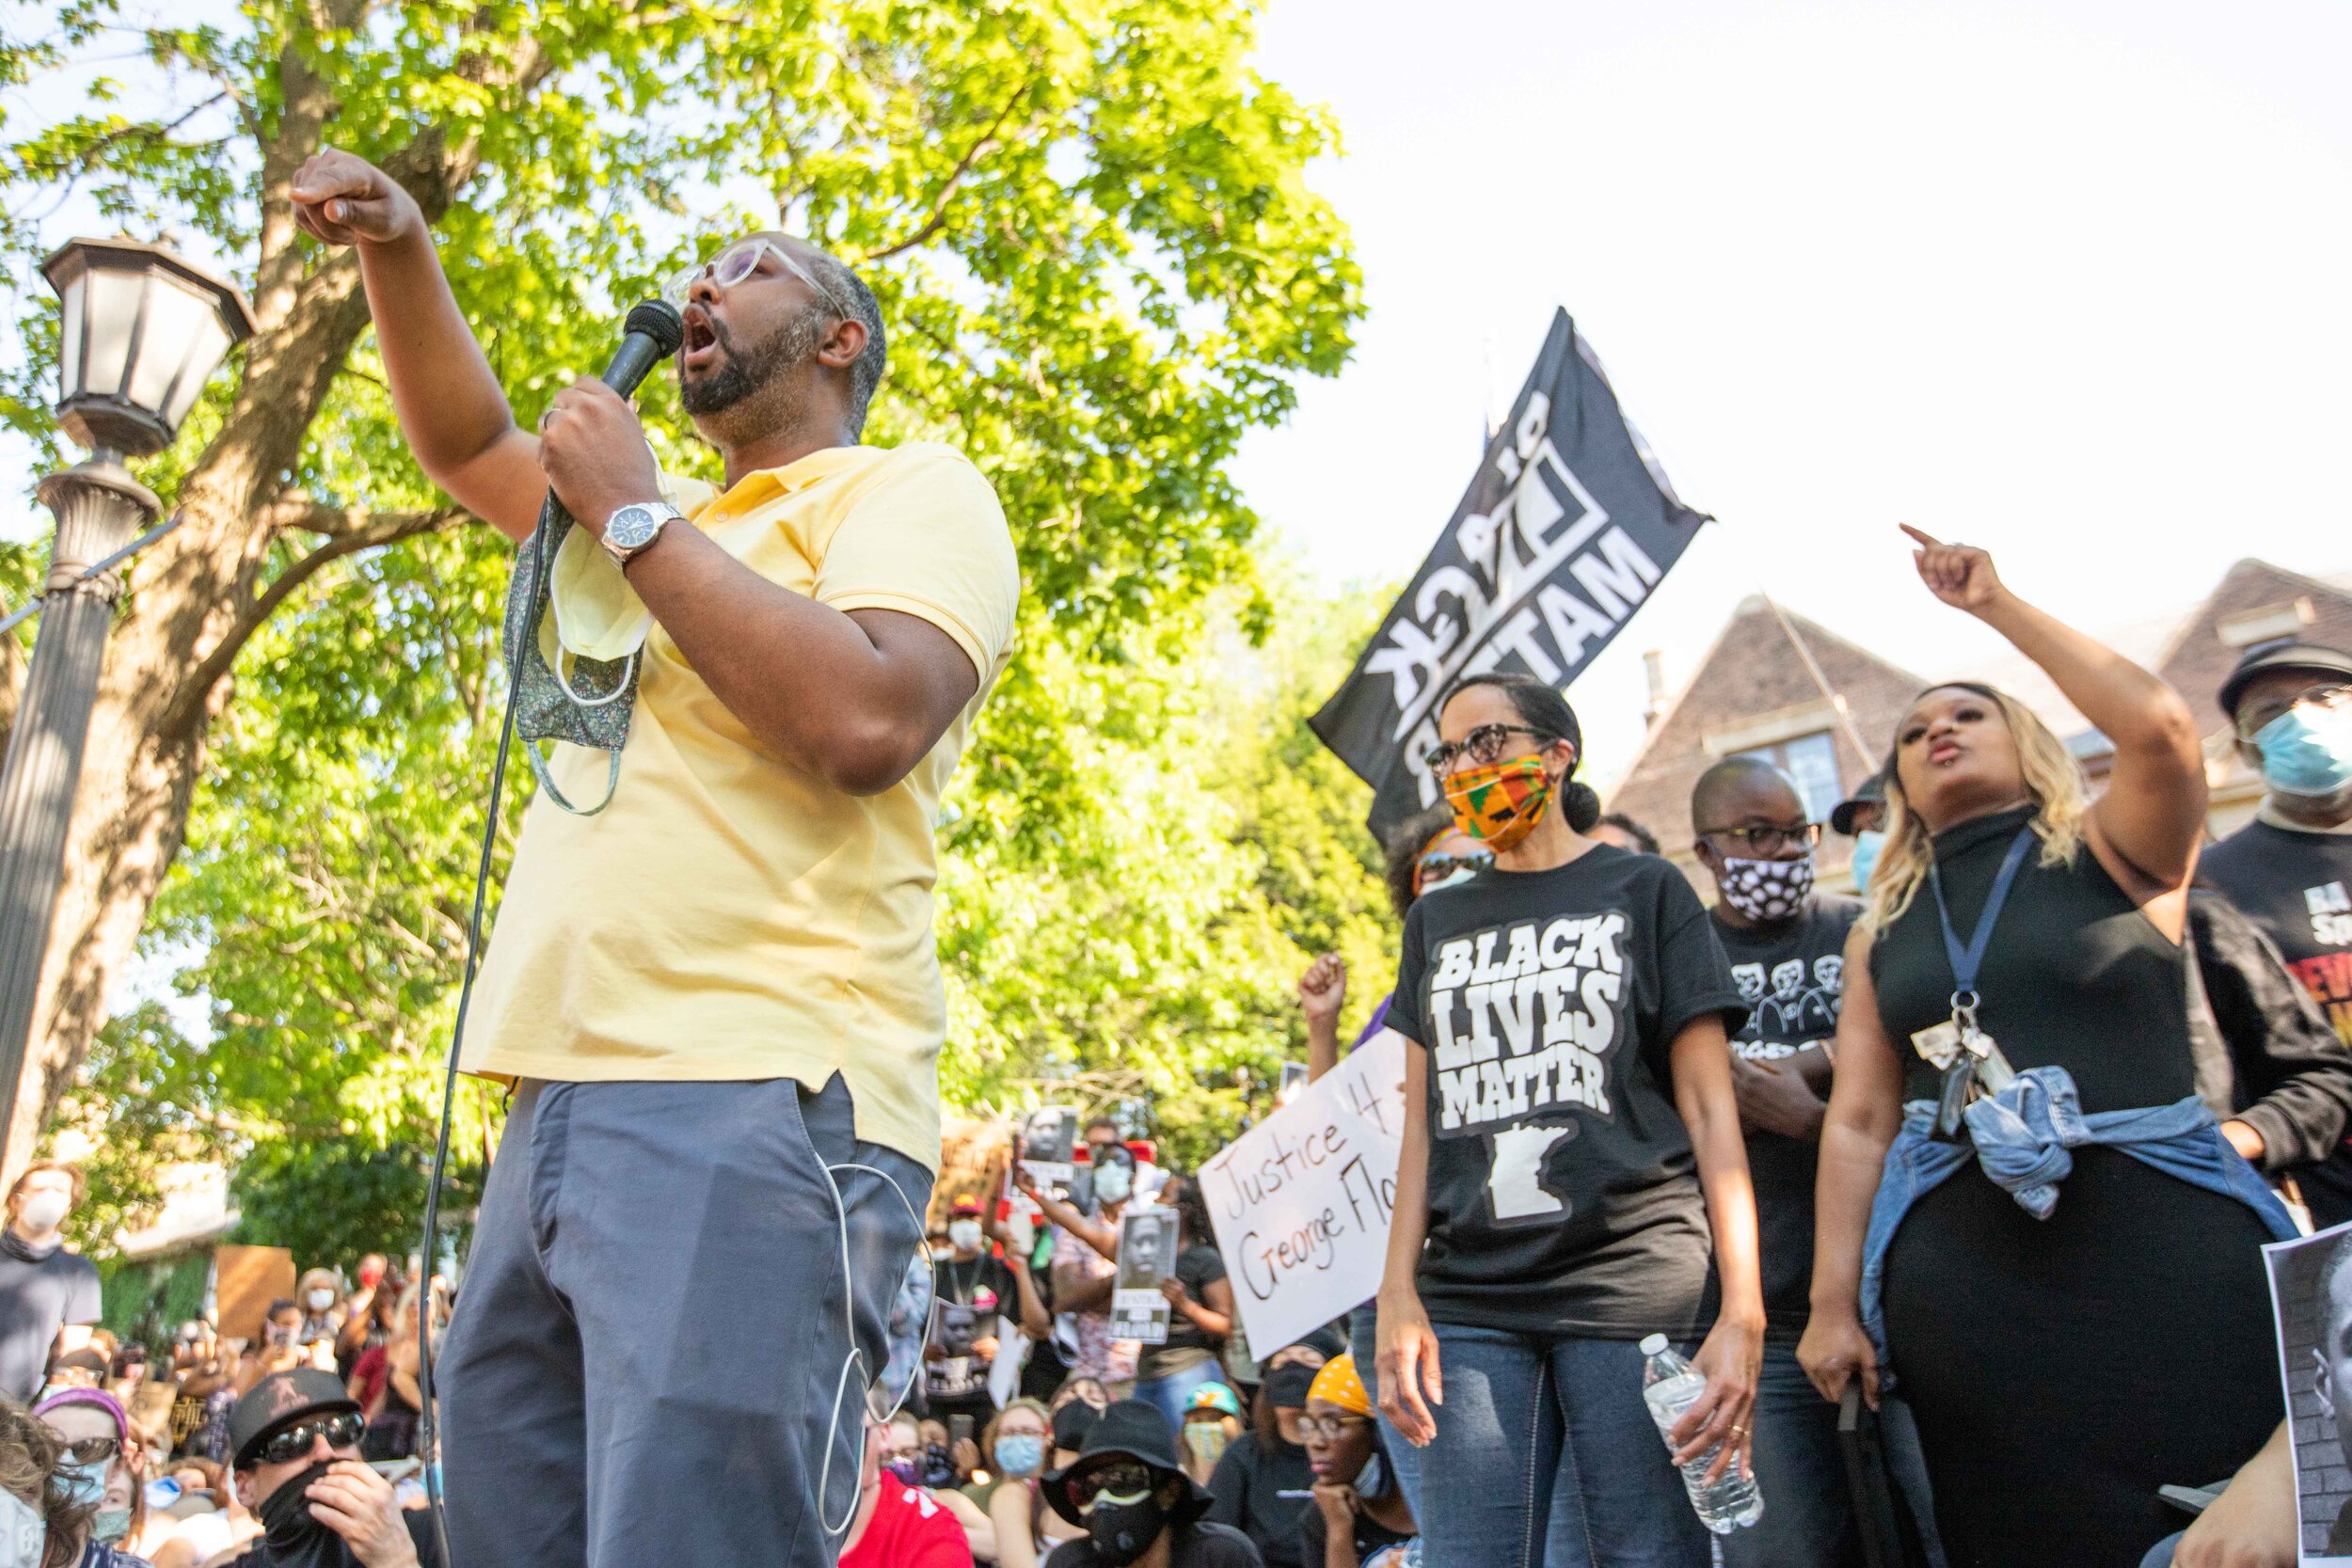  Jaylani Hussein, the Executive Director of CAIR, MN speaks to a crowd of protesters in front of the Governors Mansion in Saint Paul, Minnesota about the police killing of George Floyd on June 1, 2020. Chris Juhn/Zenger 